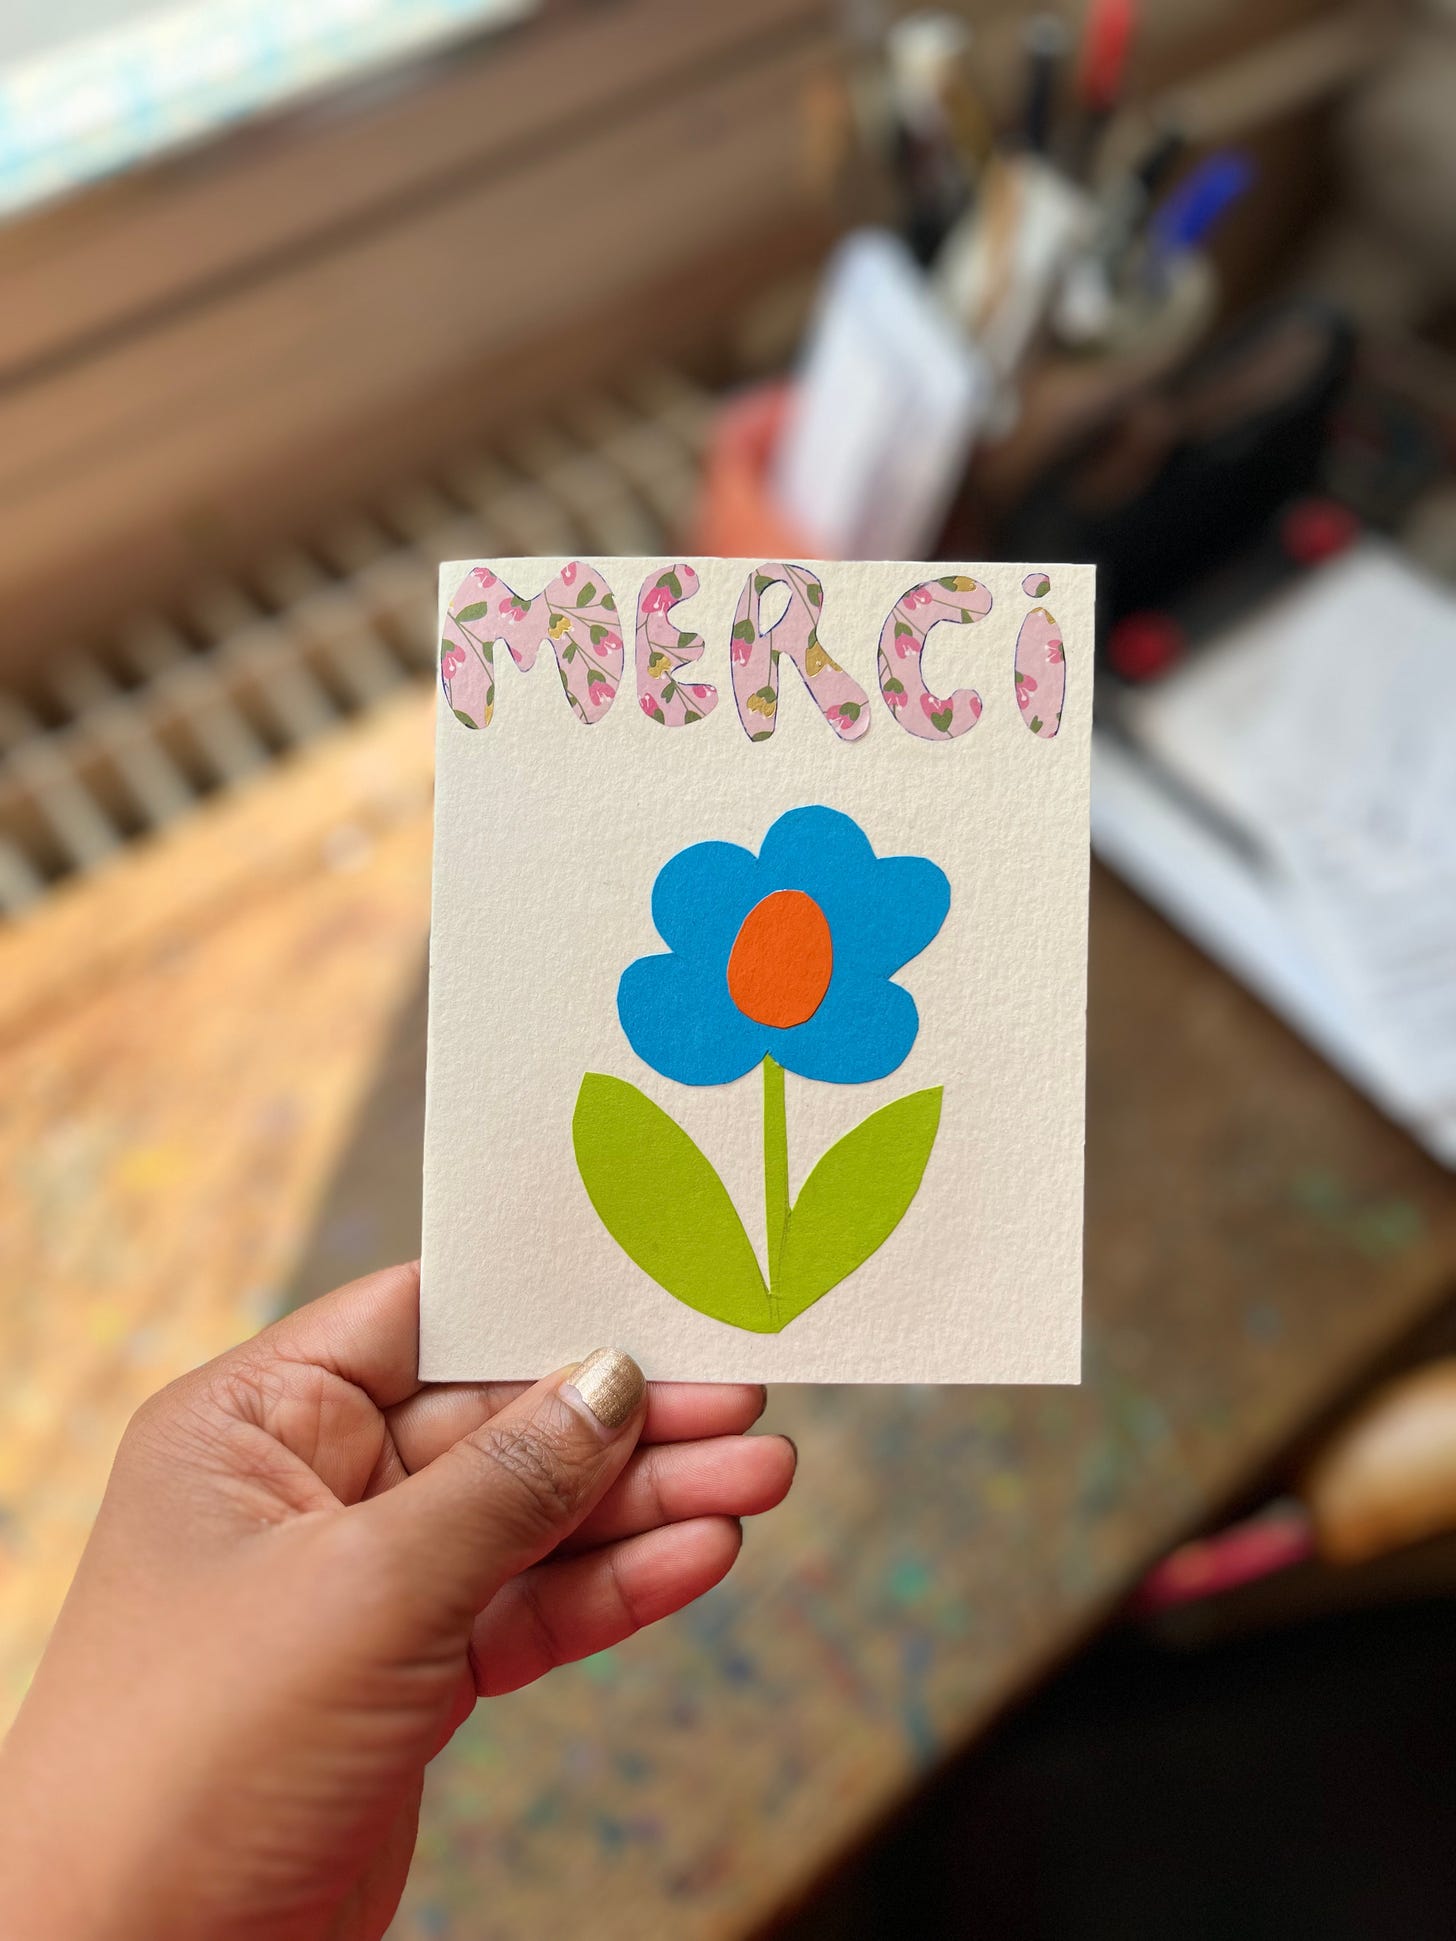 A white card with a collage of the word merci and a blue flower with green leaves